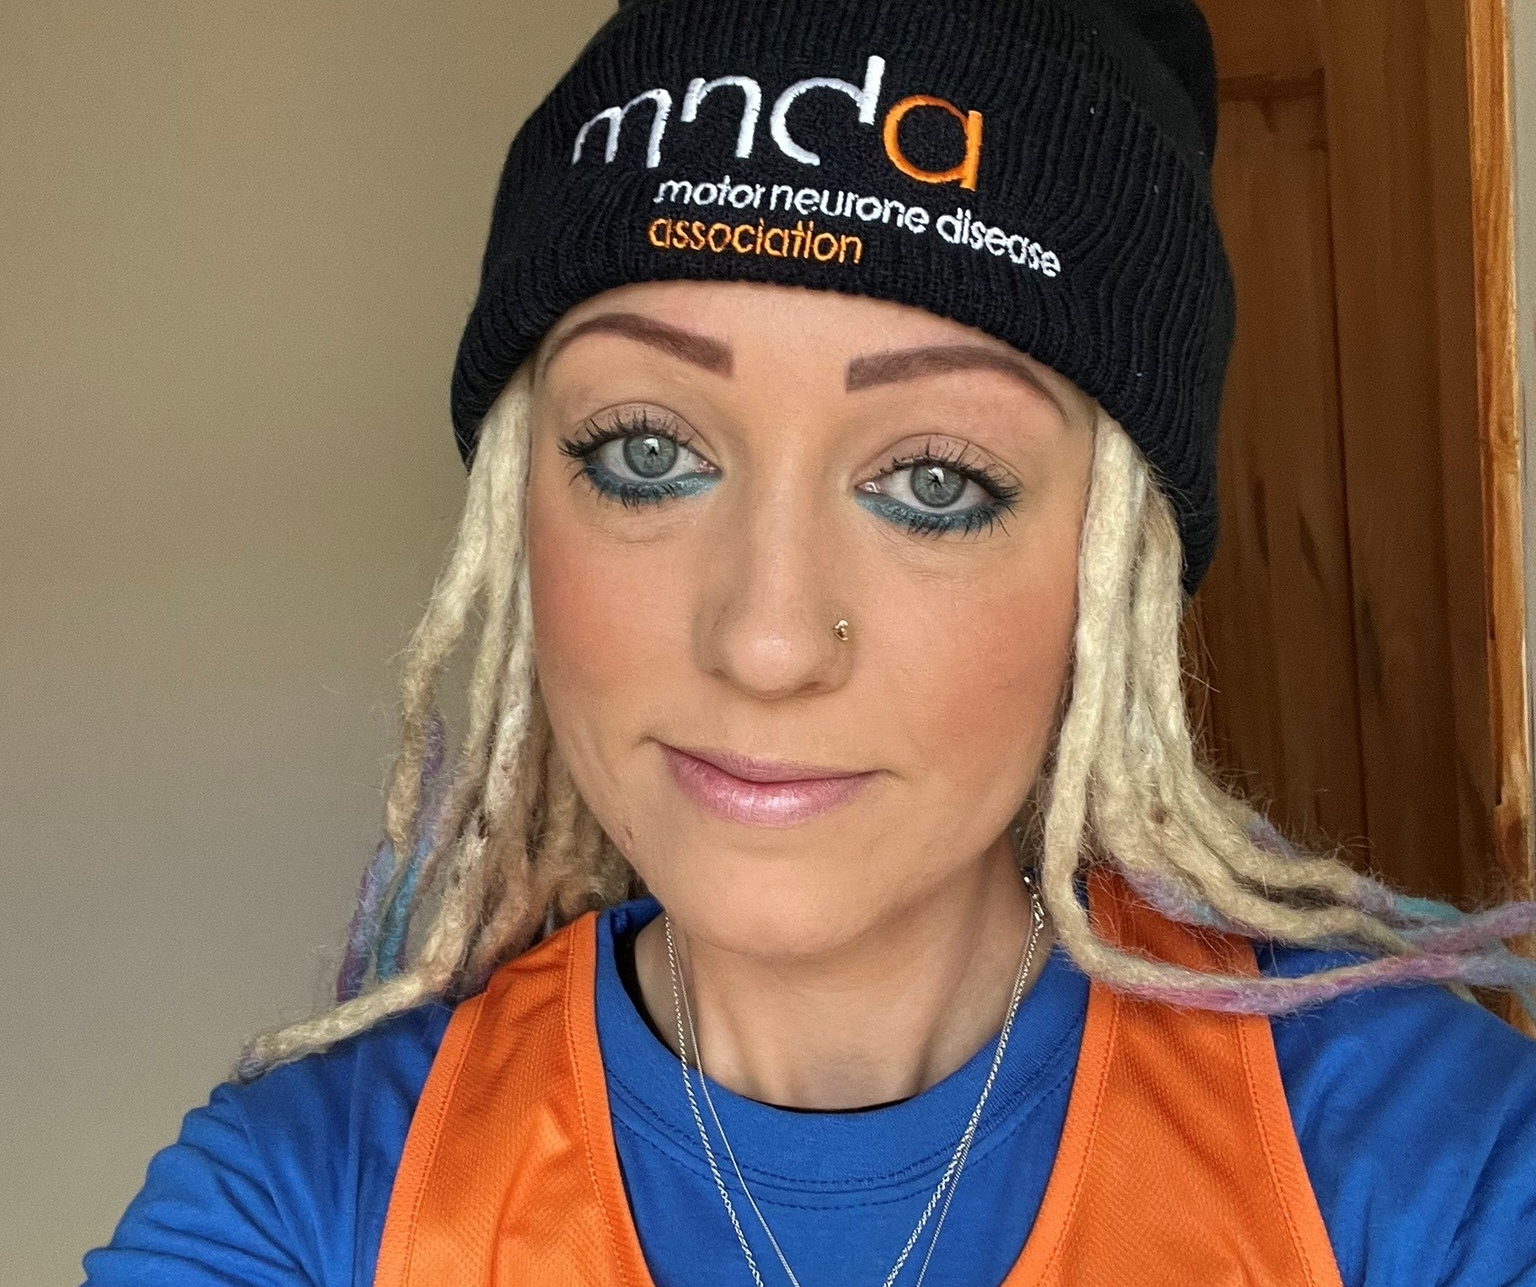 MND Association supporter in branded clothing